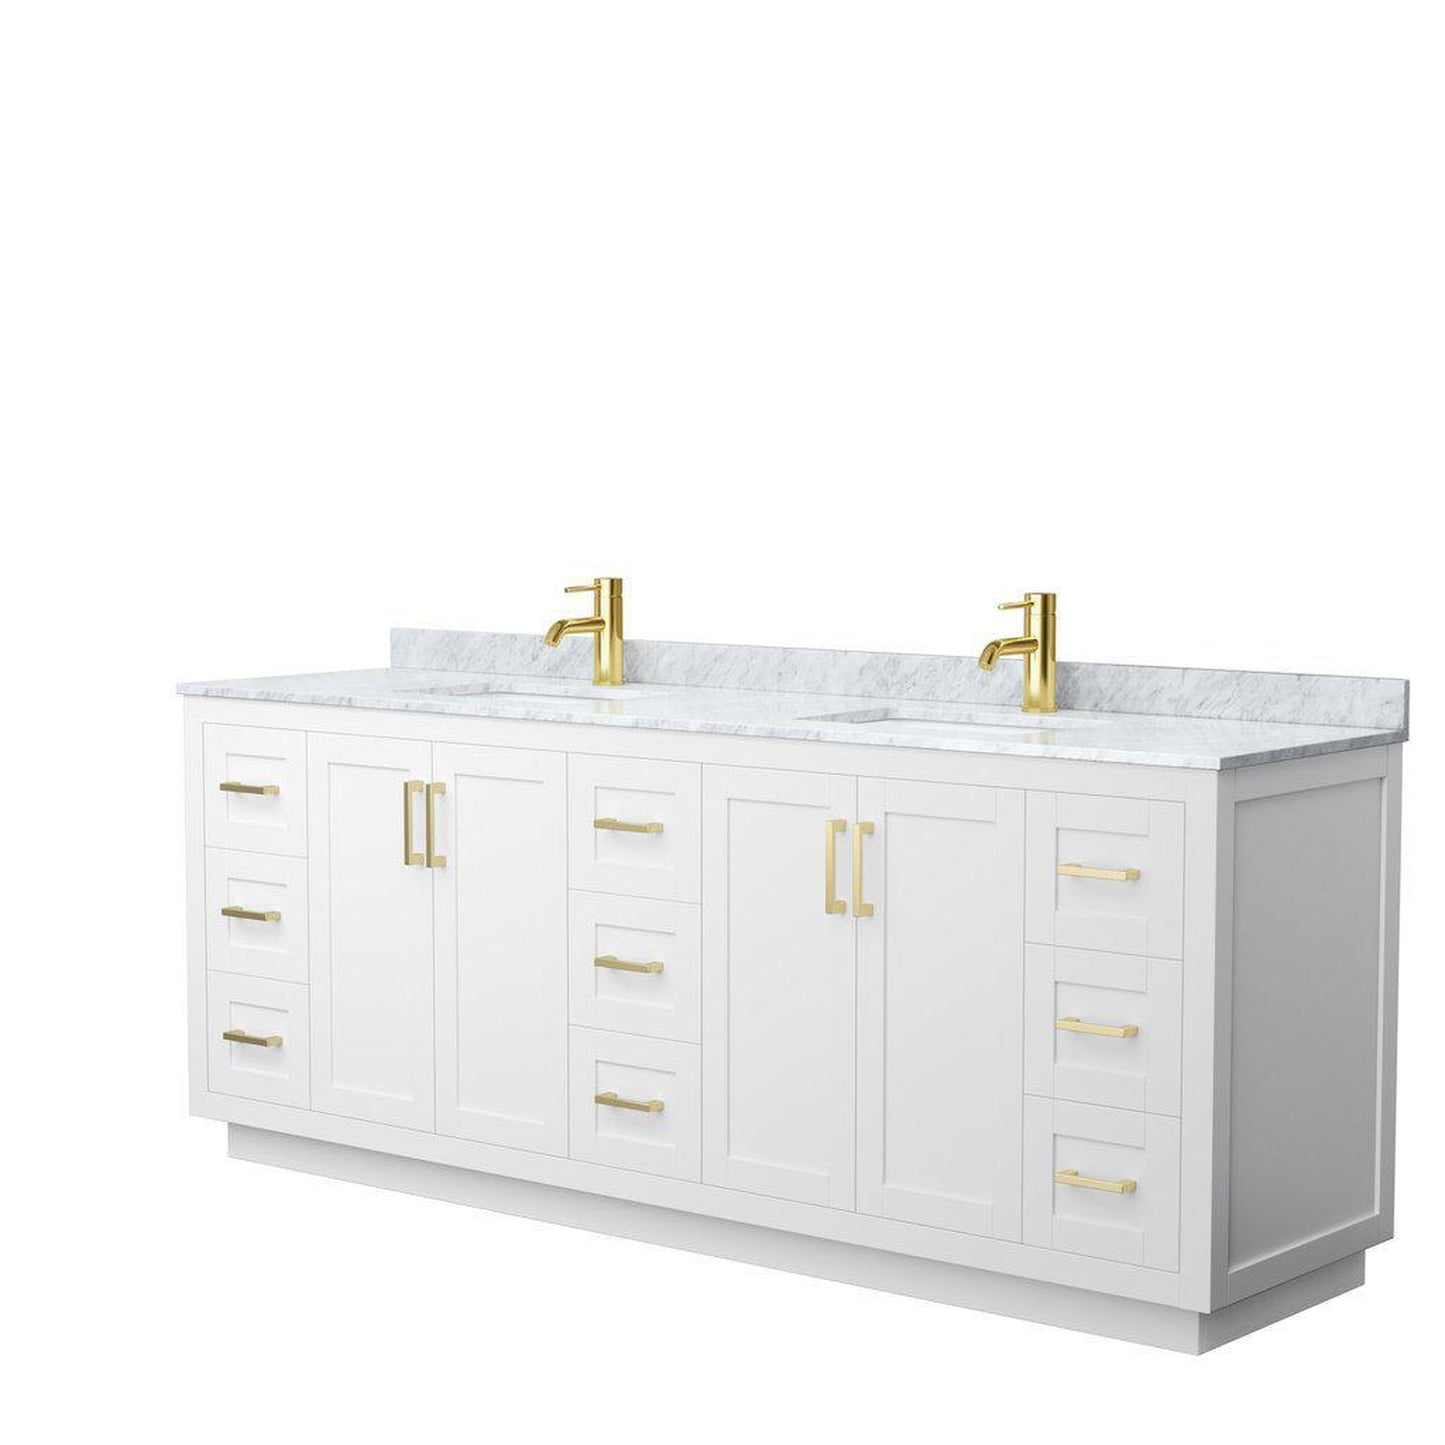 Wyndham Collection Miranda 84" Double Bathroom White Vanity Set With White Carrara Marble Countertop, Undermount Square Sink, And Brushed Gold Trim